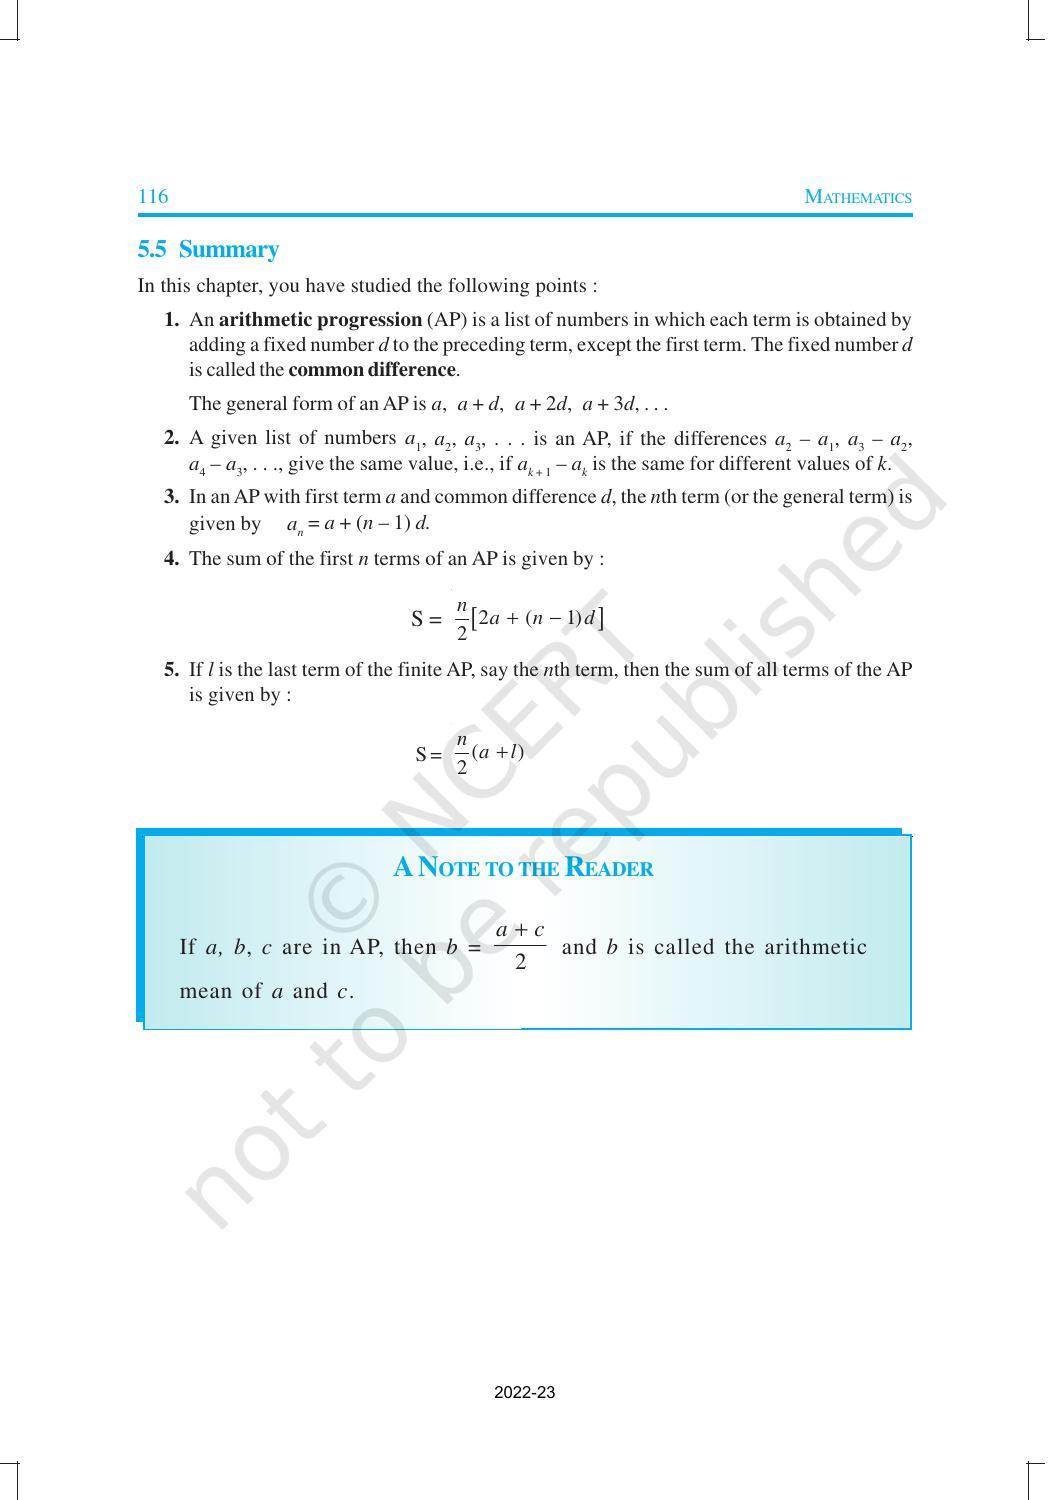 NCERT Book for Class 10 Maths Chapter 5 Arithmetic Progression - Page 24